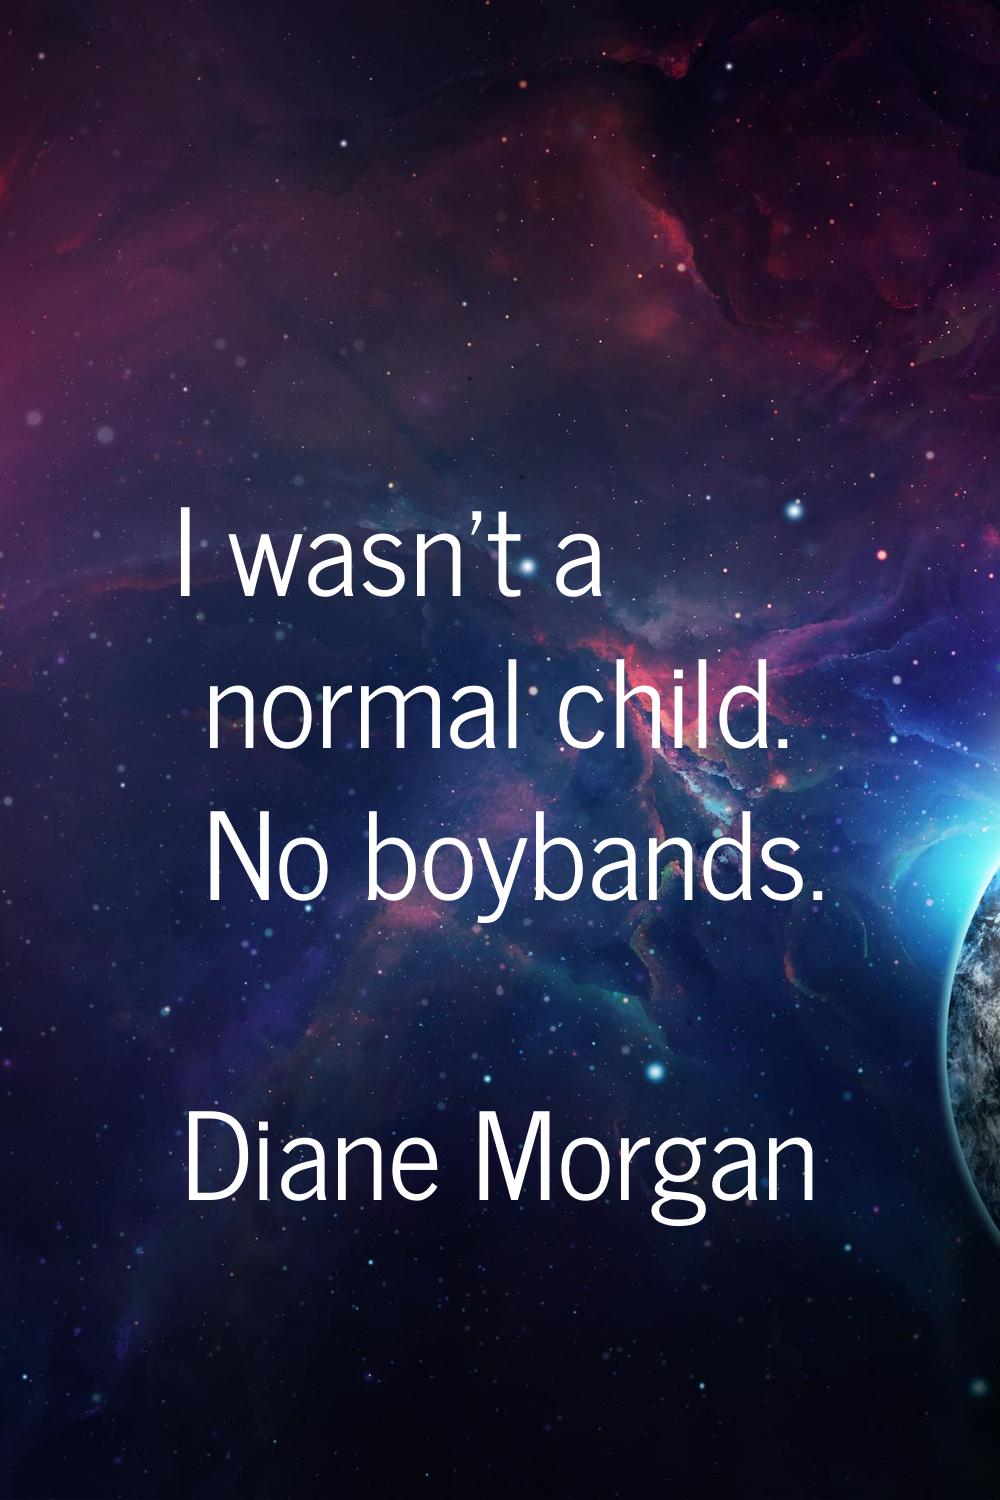 I wasn't a normal child. No boybands.